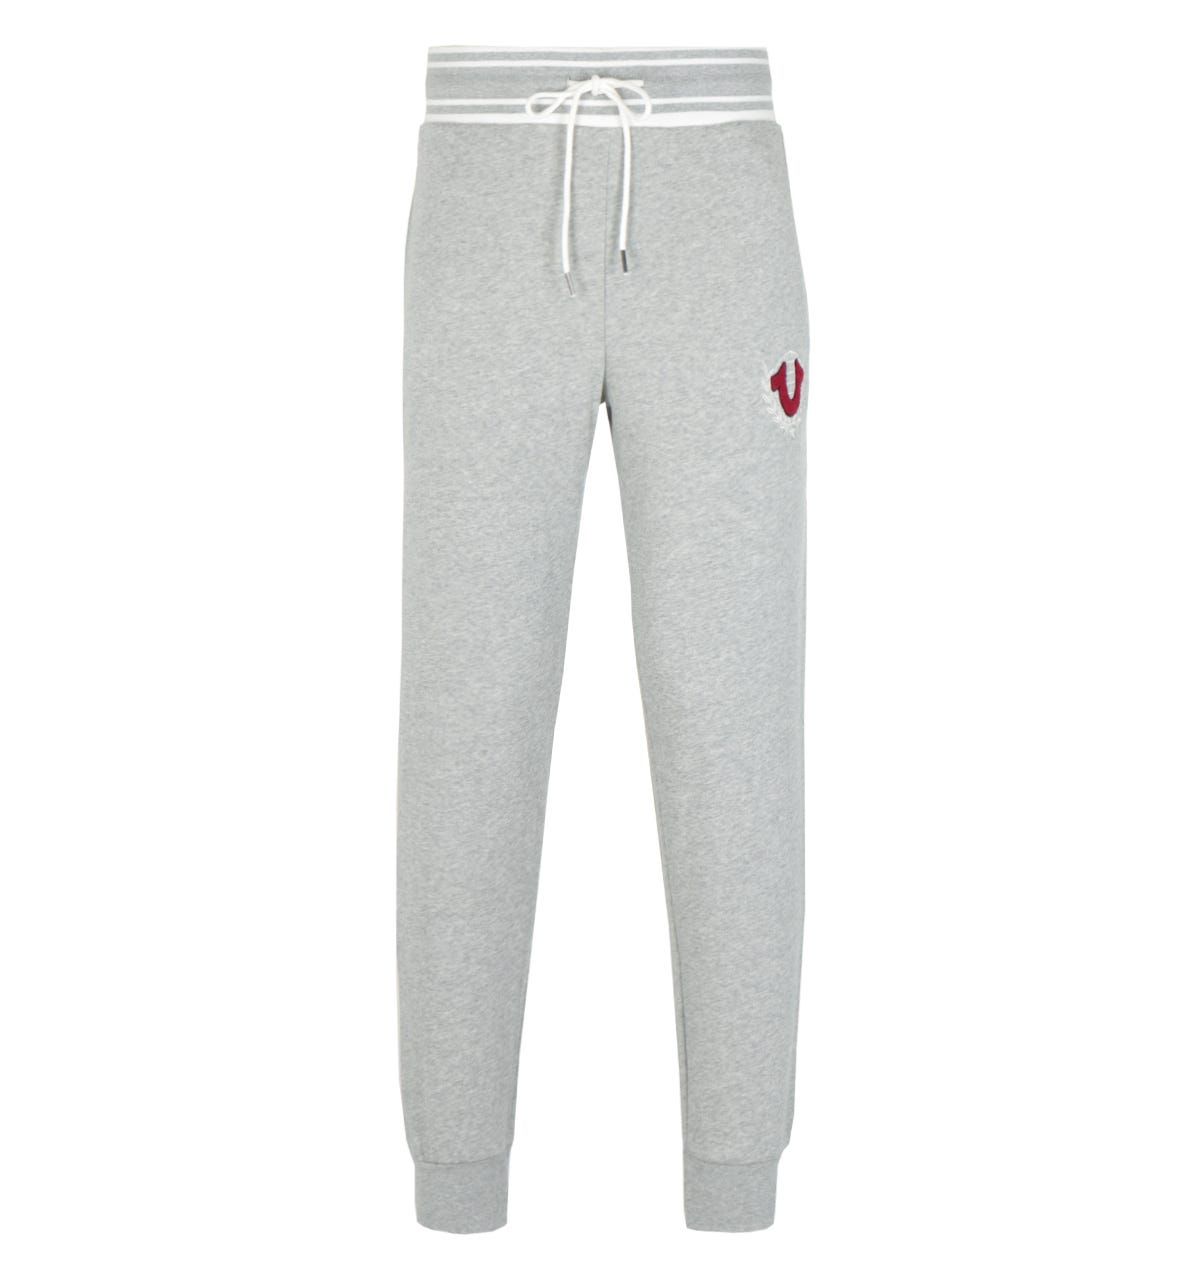 <p>Upgrade your wardrobe with the Collegiate Logo Crest Joggers in Heather Grey by True Religion\nTrue Religion are global denim experts who have redesigned and reinvented the traditional 5 pocket jean. They were founded in L.A. back in 2002 and quickly became known for quality craftsmanship, bold design and the iconic lucky horseshoe logo.</p><ul><li>Cotton blend construction</li><li>Elastic waistband</li><li>Tapered ankle hem</li><li>On-seam side pockets</li><li>Back patch pocket</li><li>Varsity-inspired chenille horseshoe crest at the hip</li></ul><p>Style & Fit:</p><ul><li>Regular fit</li><li>Joggers</li></ul><p>Fabric Composition & Care:</p><ul><li>60% Cotton 40% Polyester</li><li>Machine wash</li></ul>